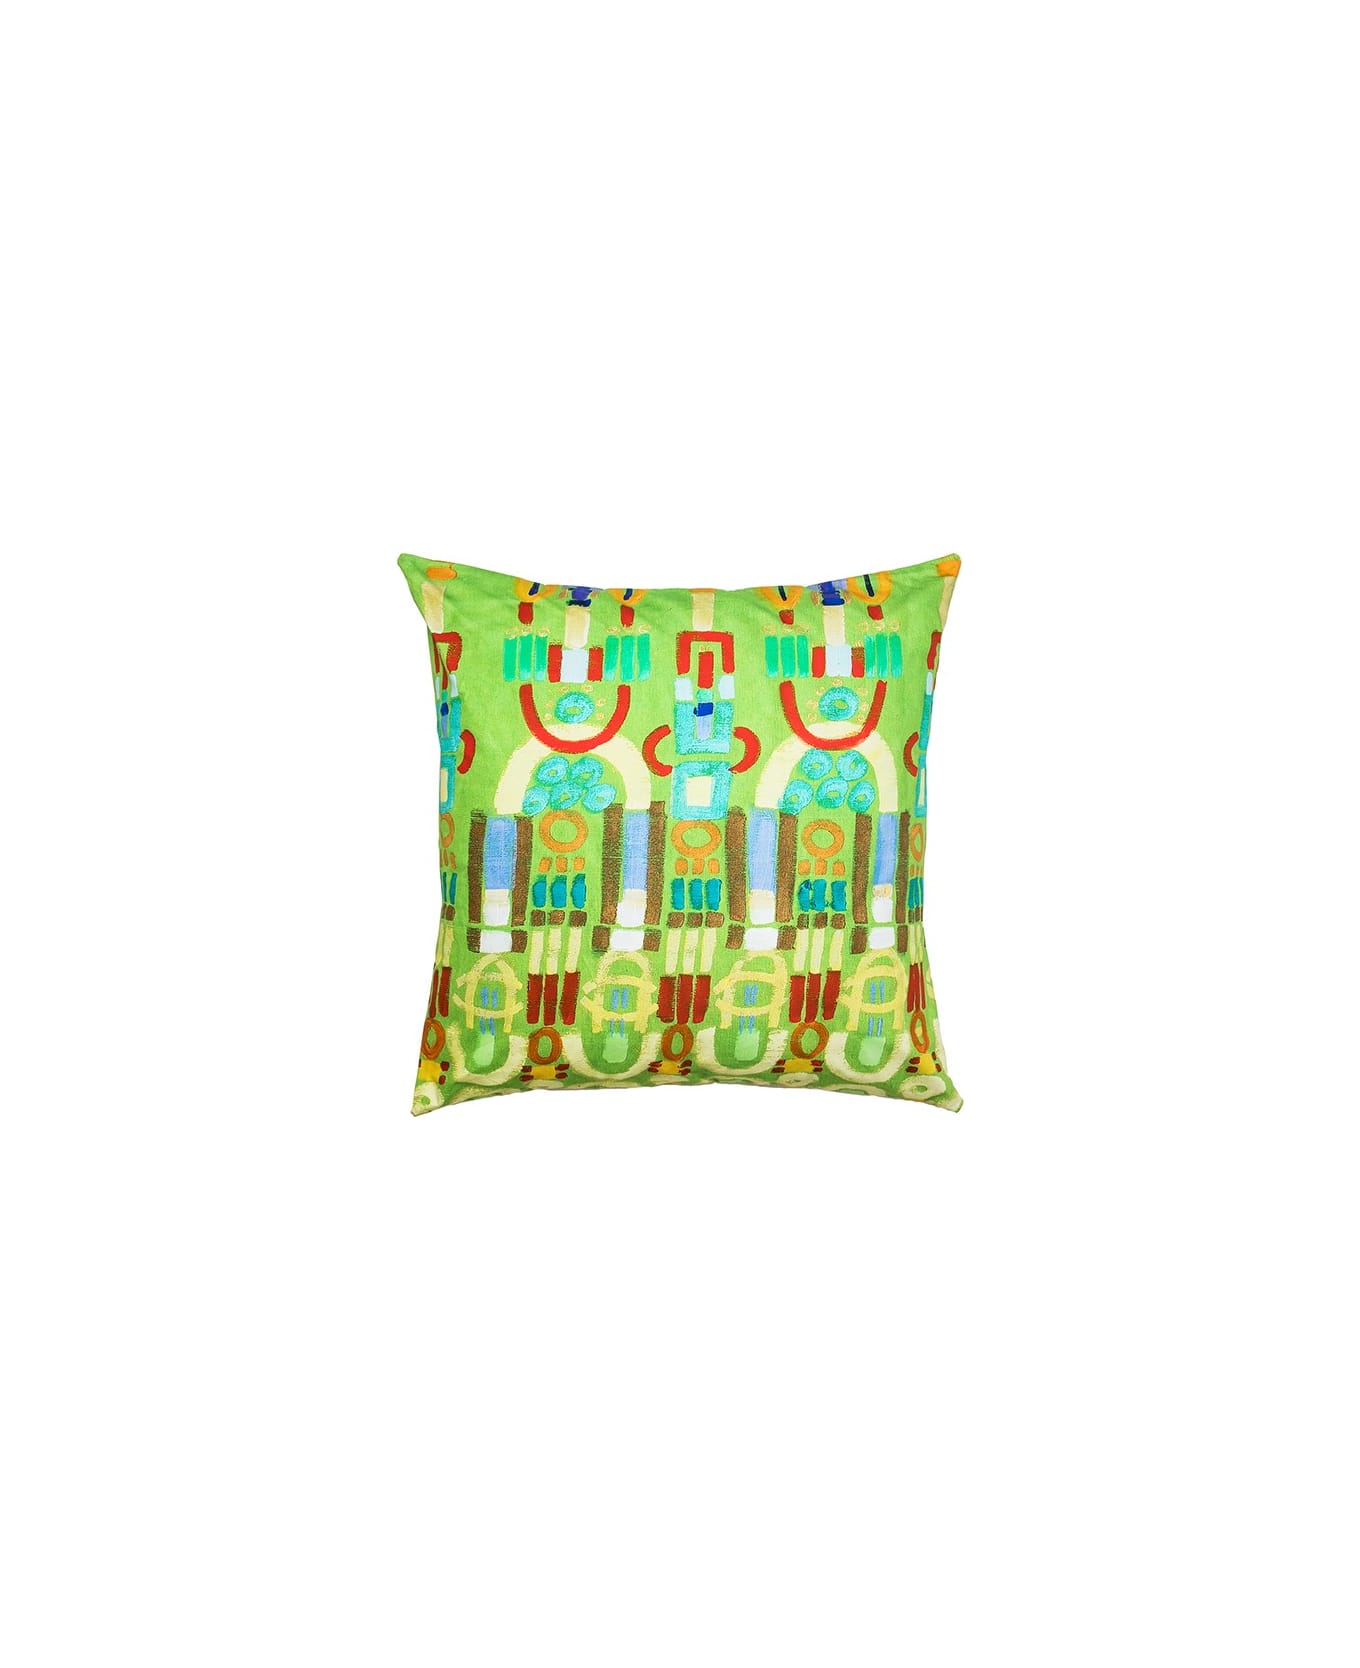 Le Botteghe su Gologone Printed Cushions 50x50 Cm - Lime Green クッション